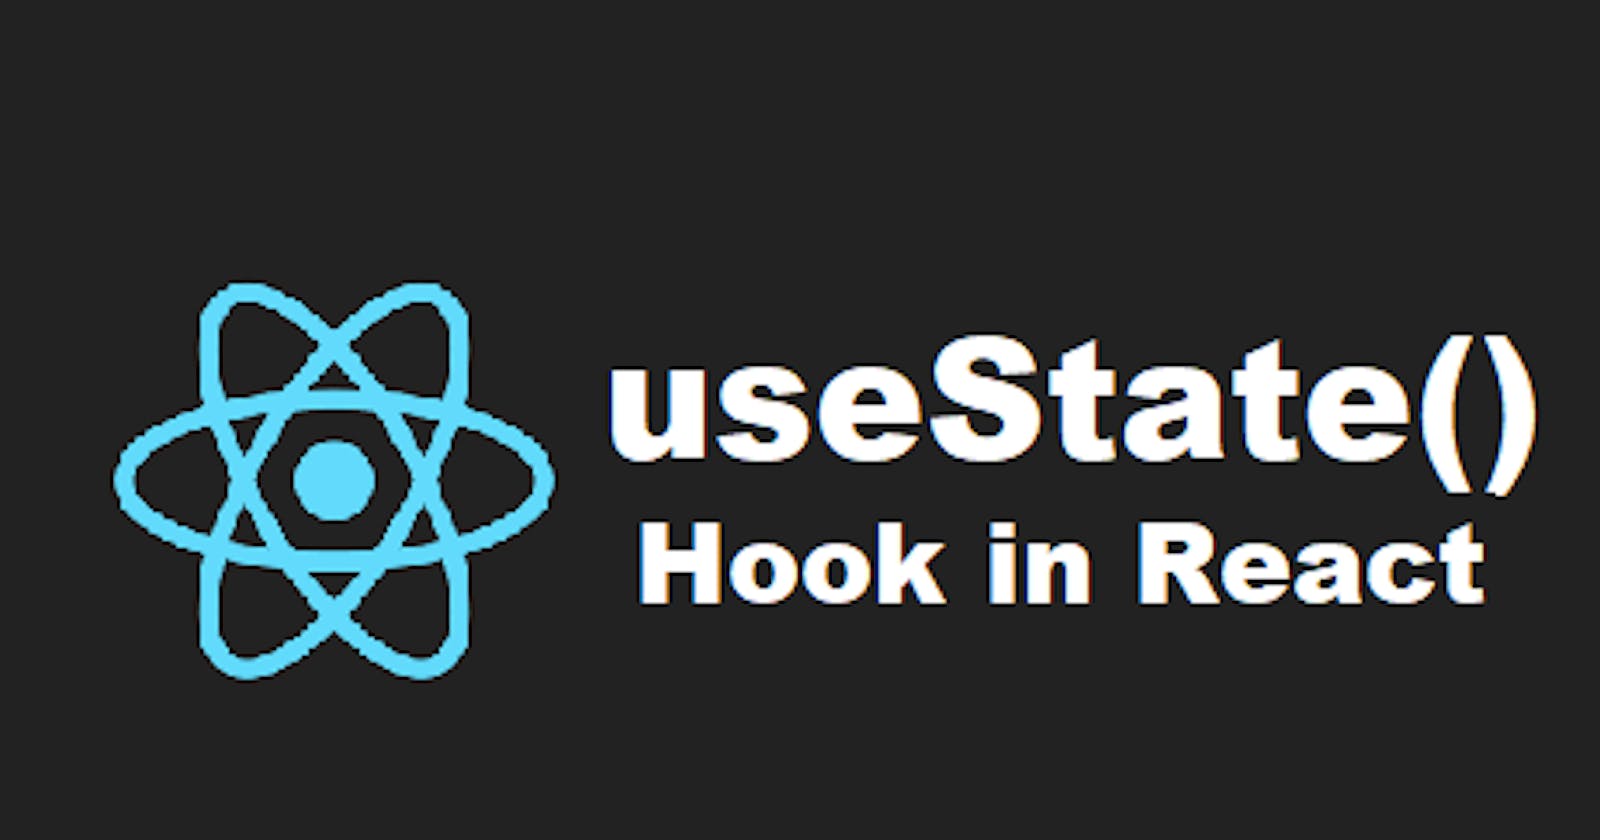 State Hook in React.js